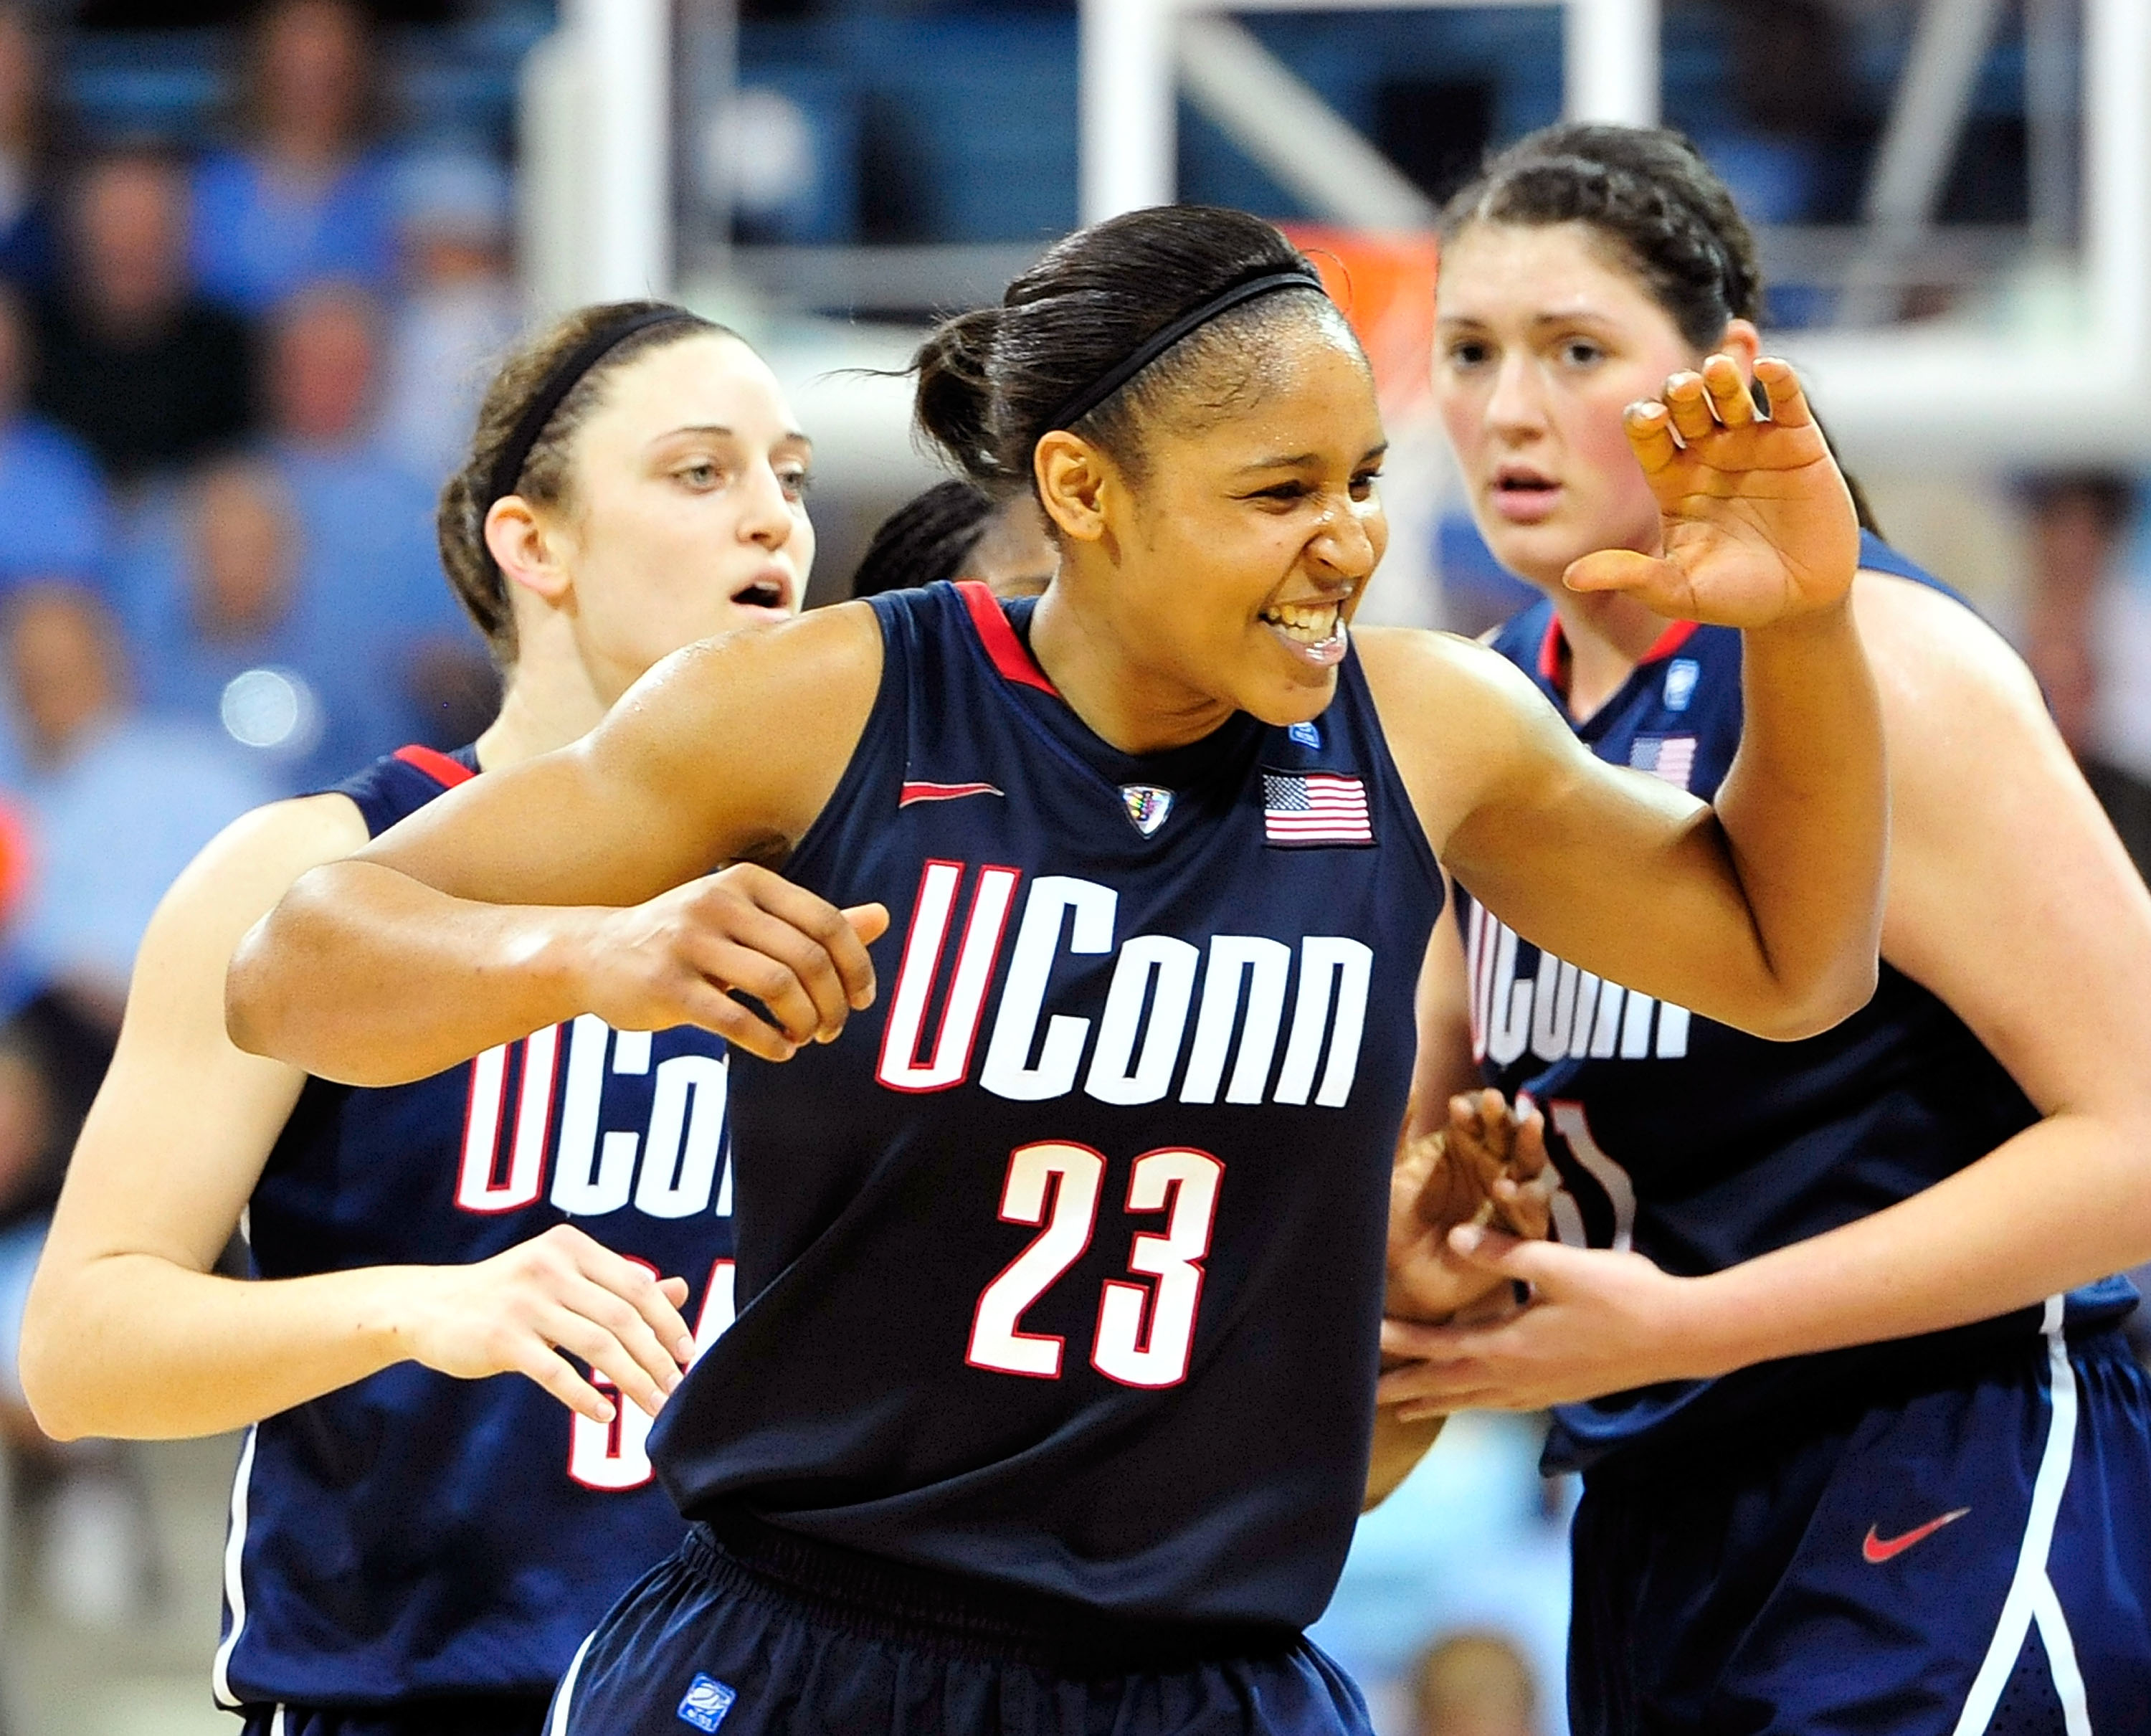 Three UConn basketball players on court celebrating, with one making an &quot;OK&quot; gesture